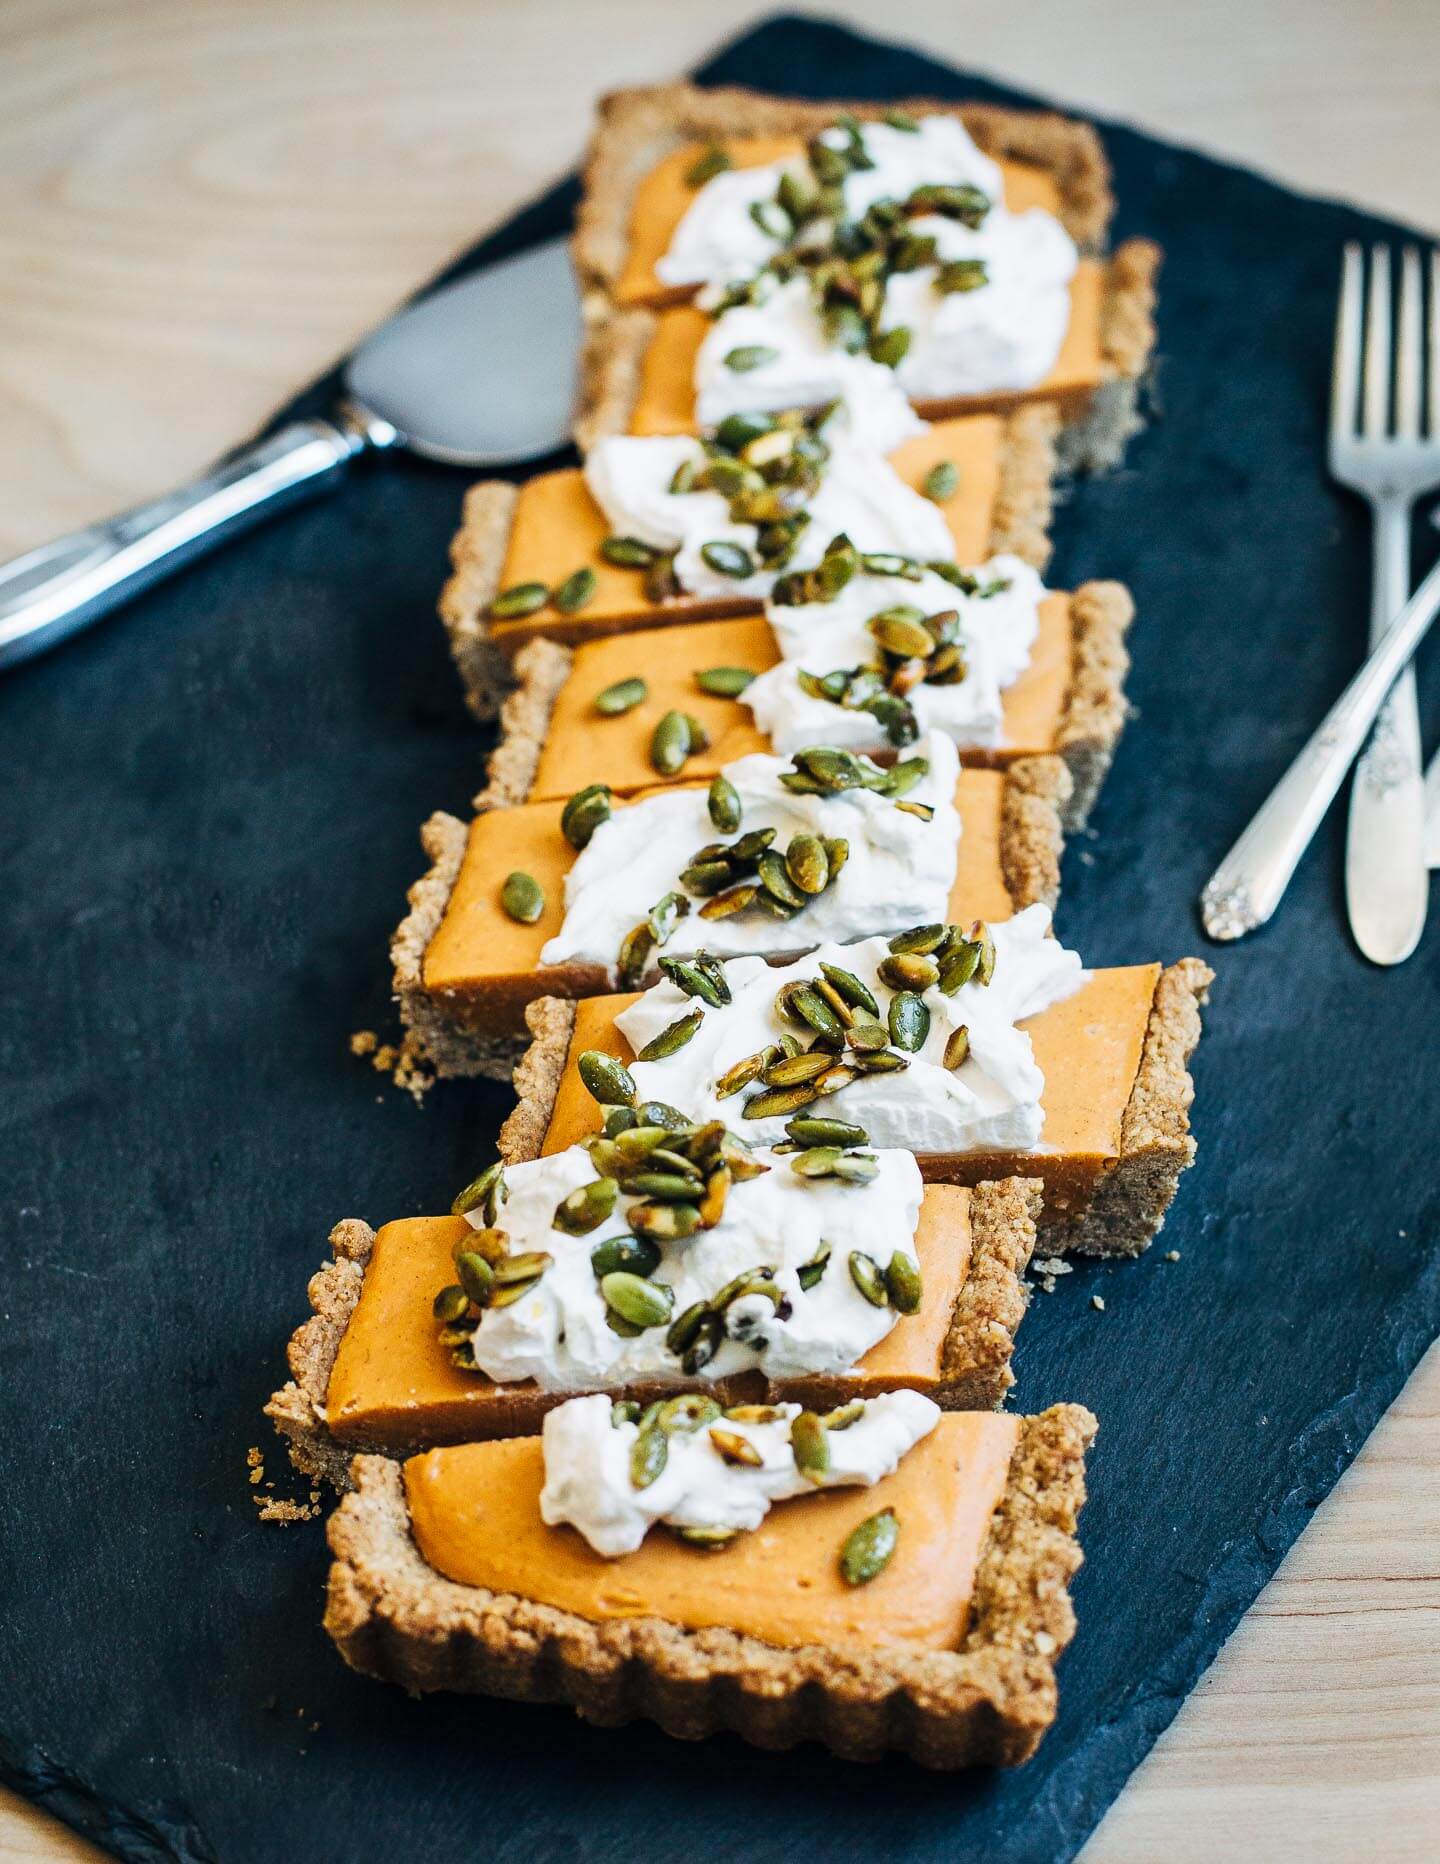 This vegan, gluten-free coconut cream and sweet potato tart has a silky texture with the spice and flavor of a classic sweet potato pie. It's topped with maple-sweetened coconut cream and salty-sweet toasted pepitas.